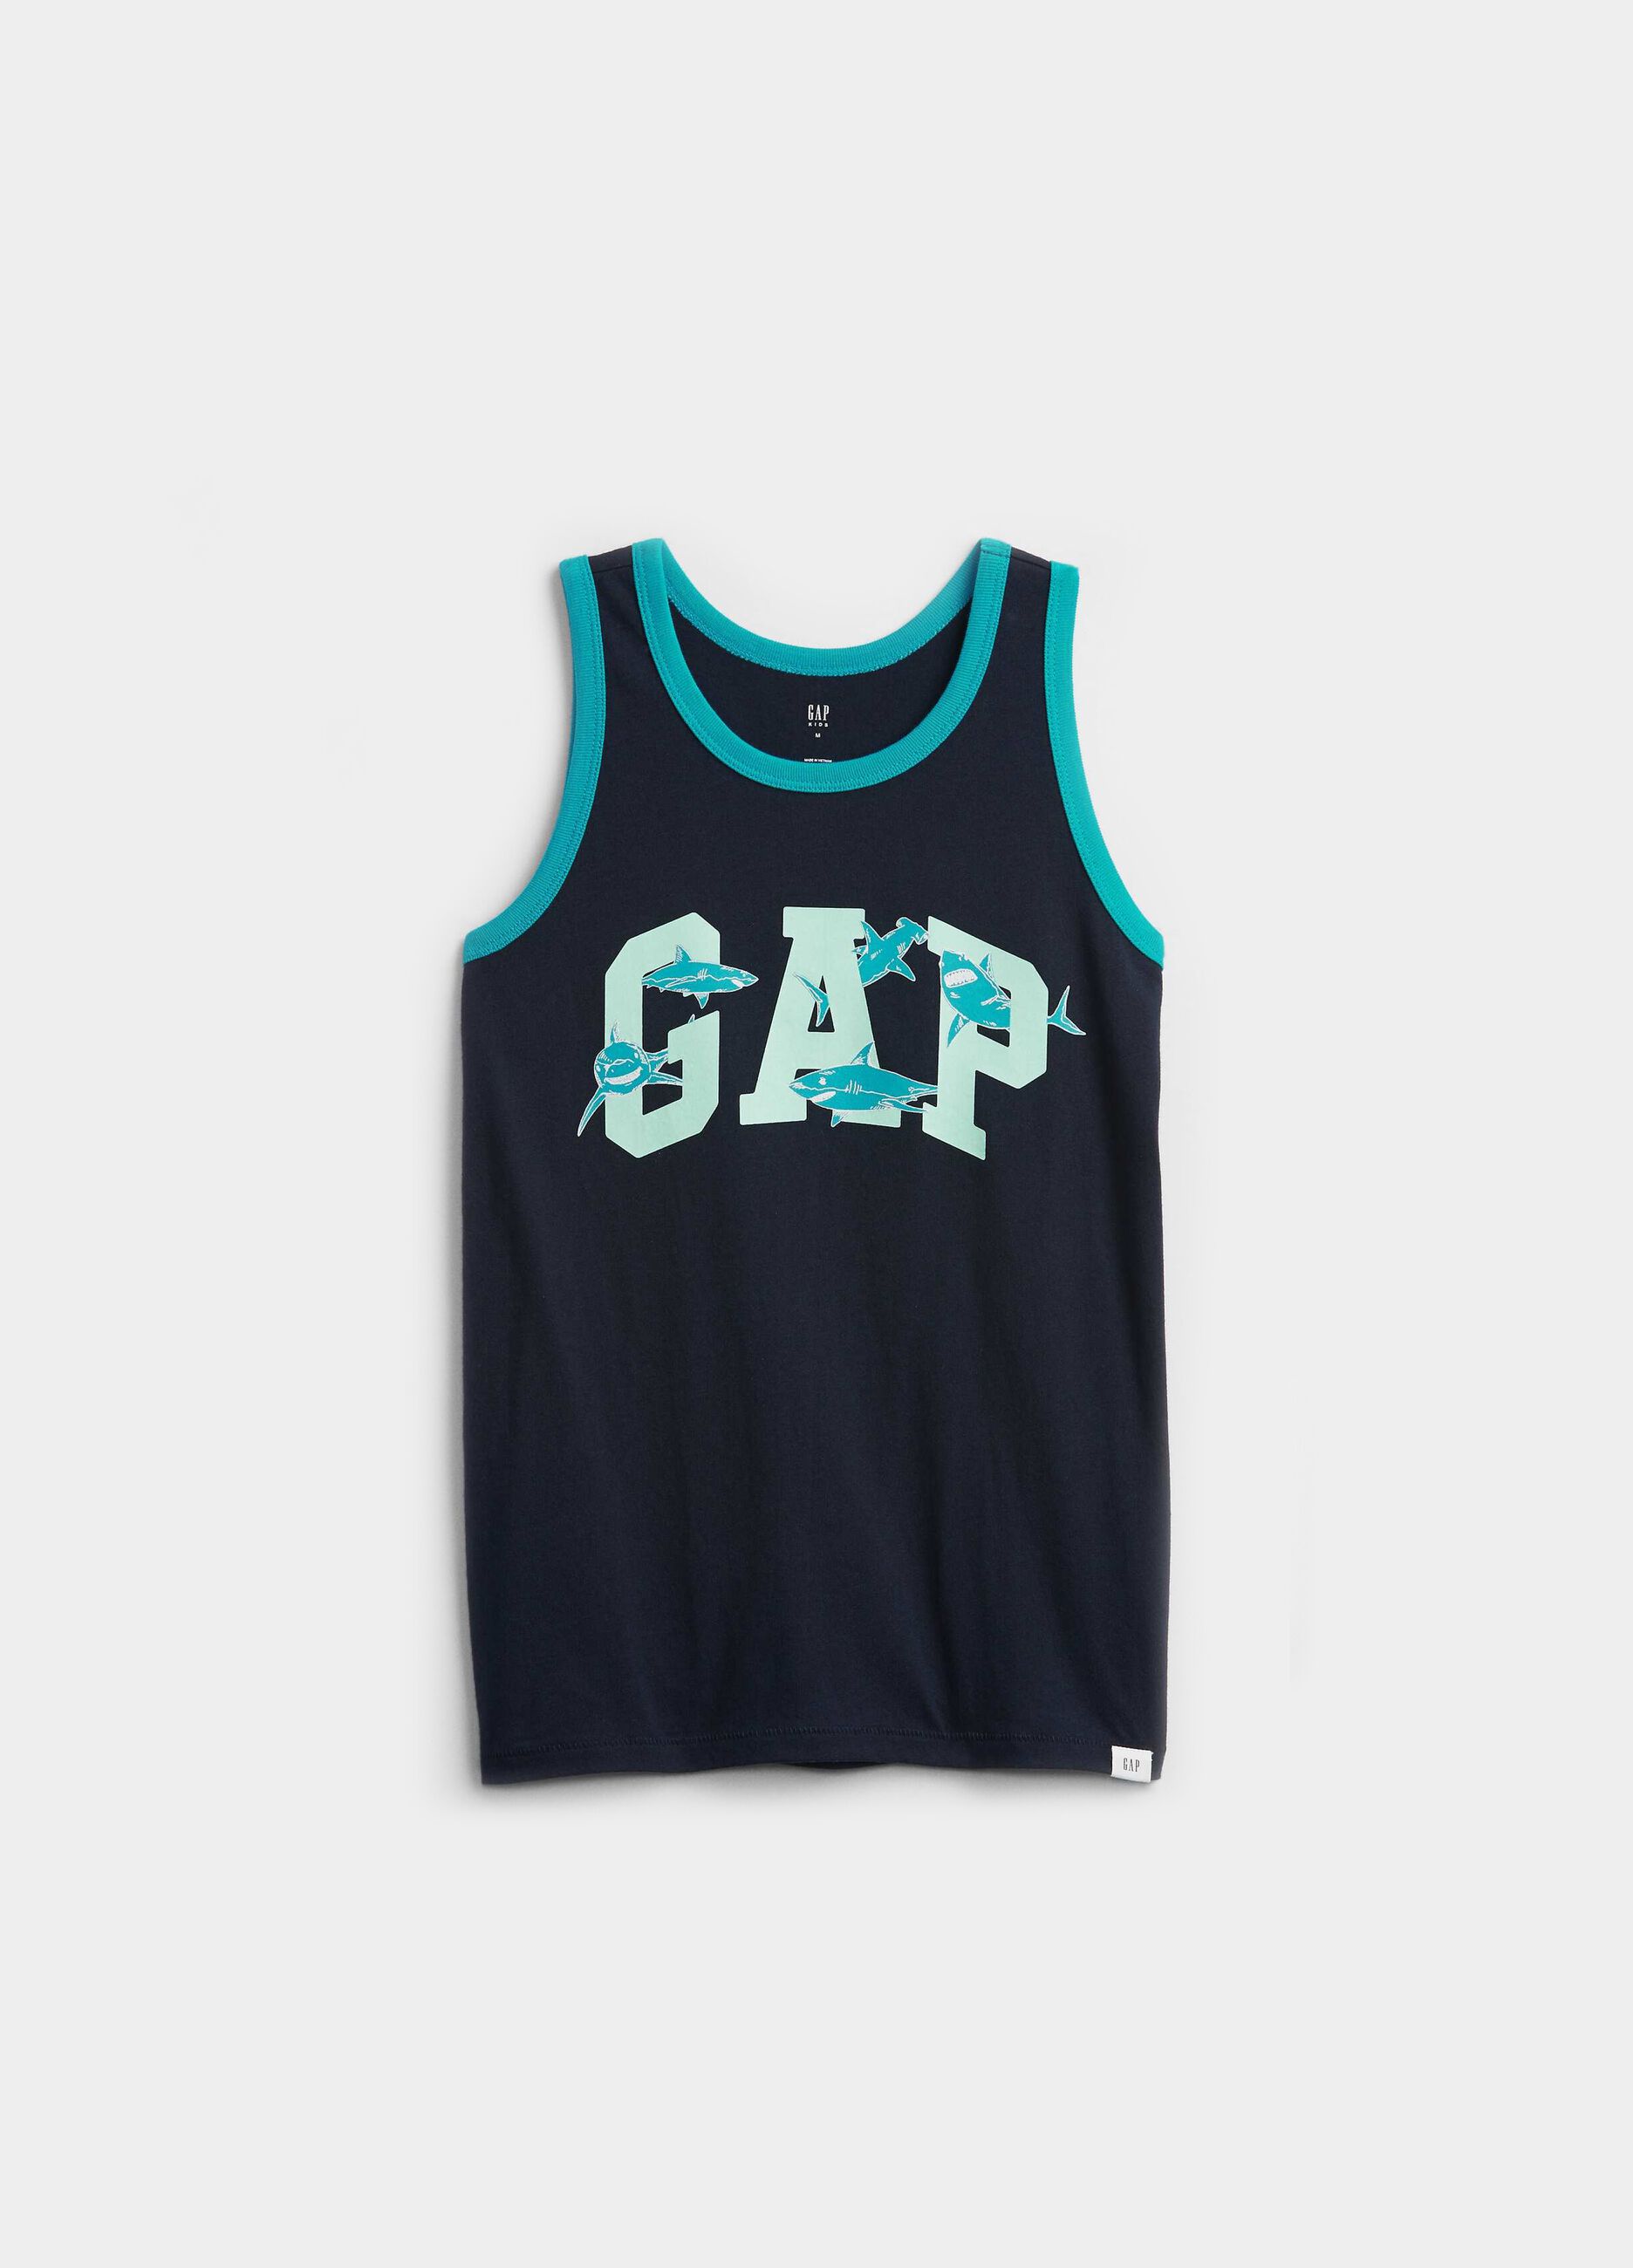 Tank top with logo and sharks